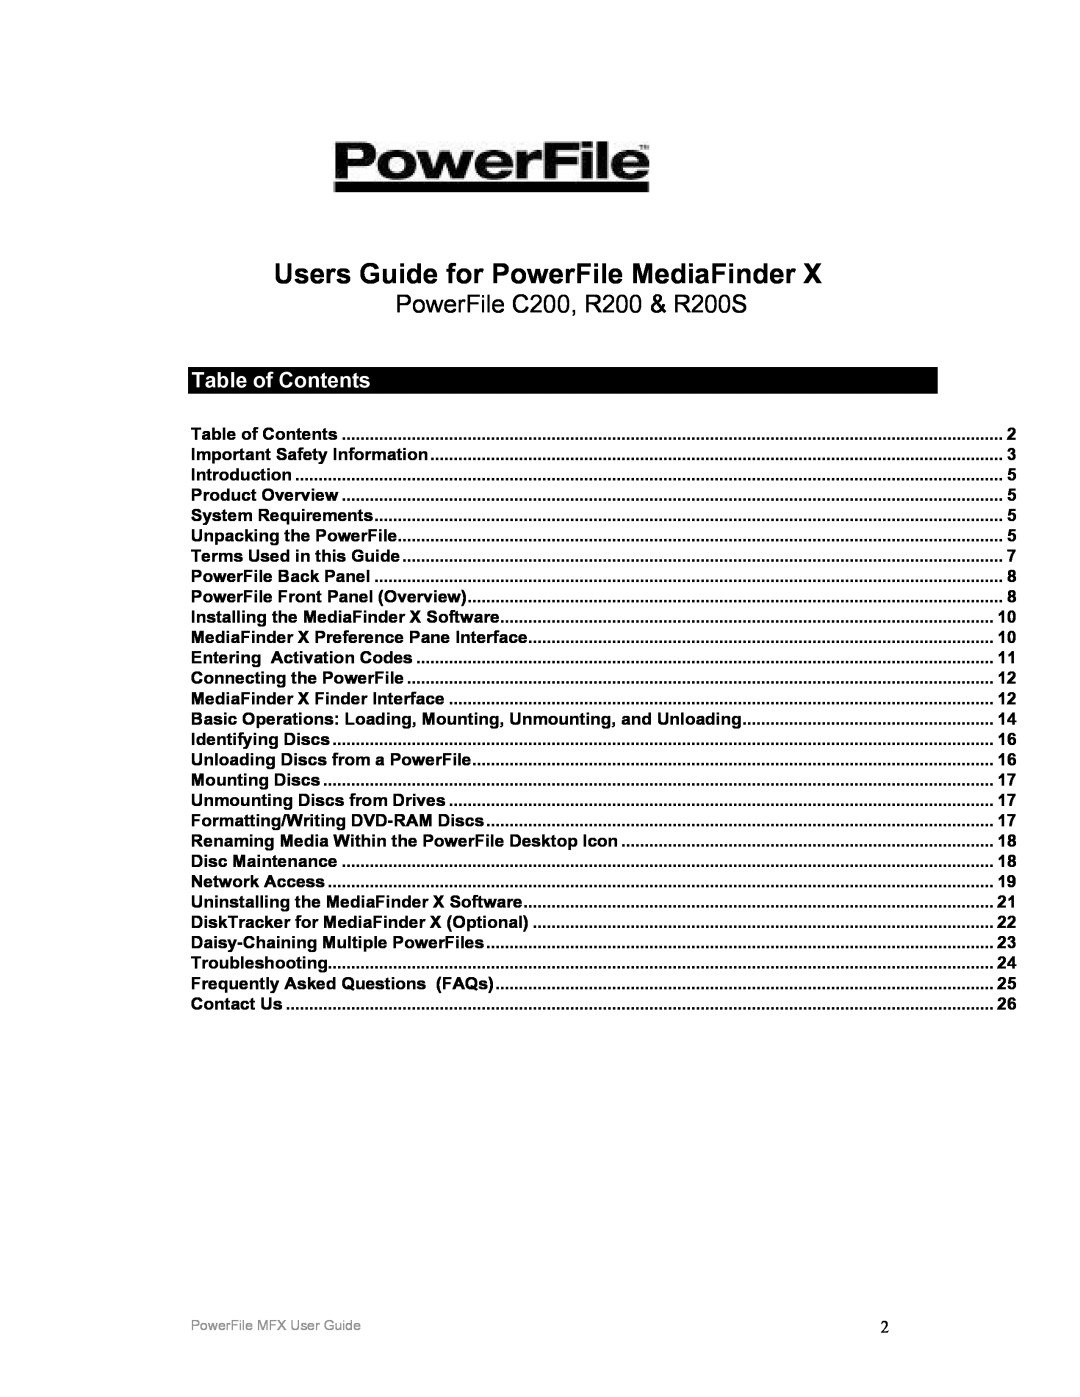 PowerFile manual Table of Contents, Users Guide for PowerFile MediaFinder, PowerFile C200, R200 & R200S 